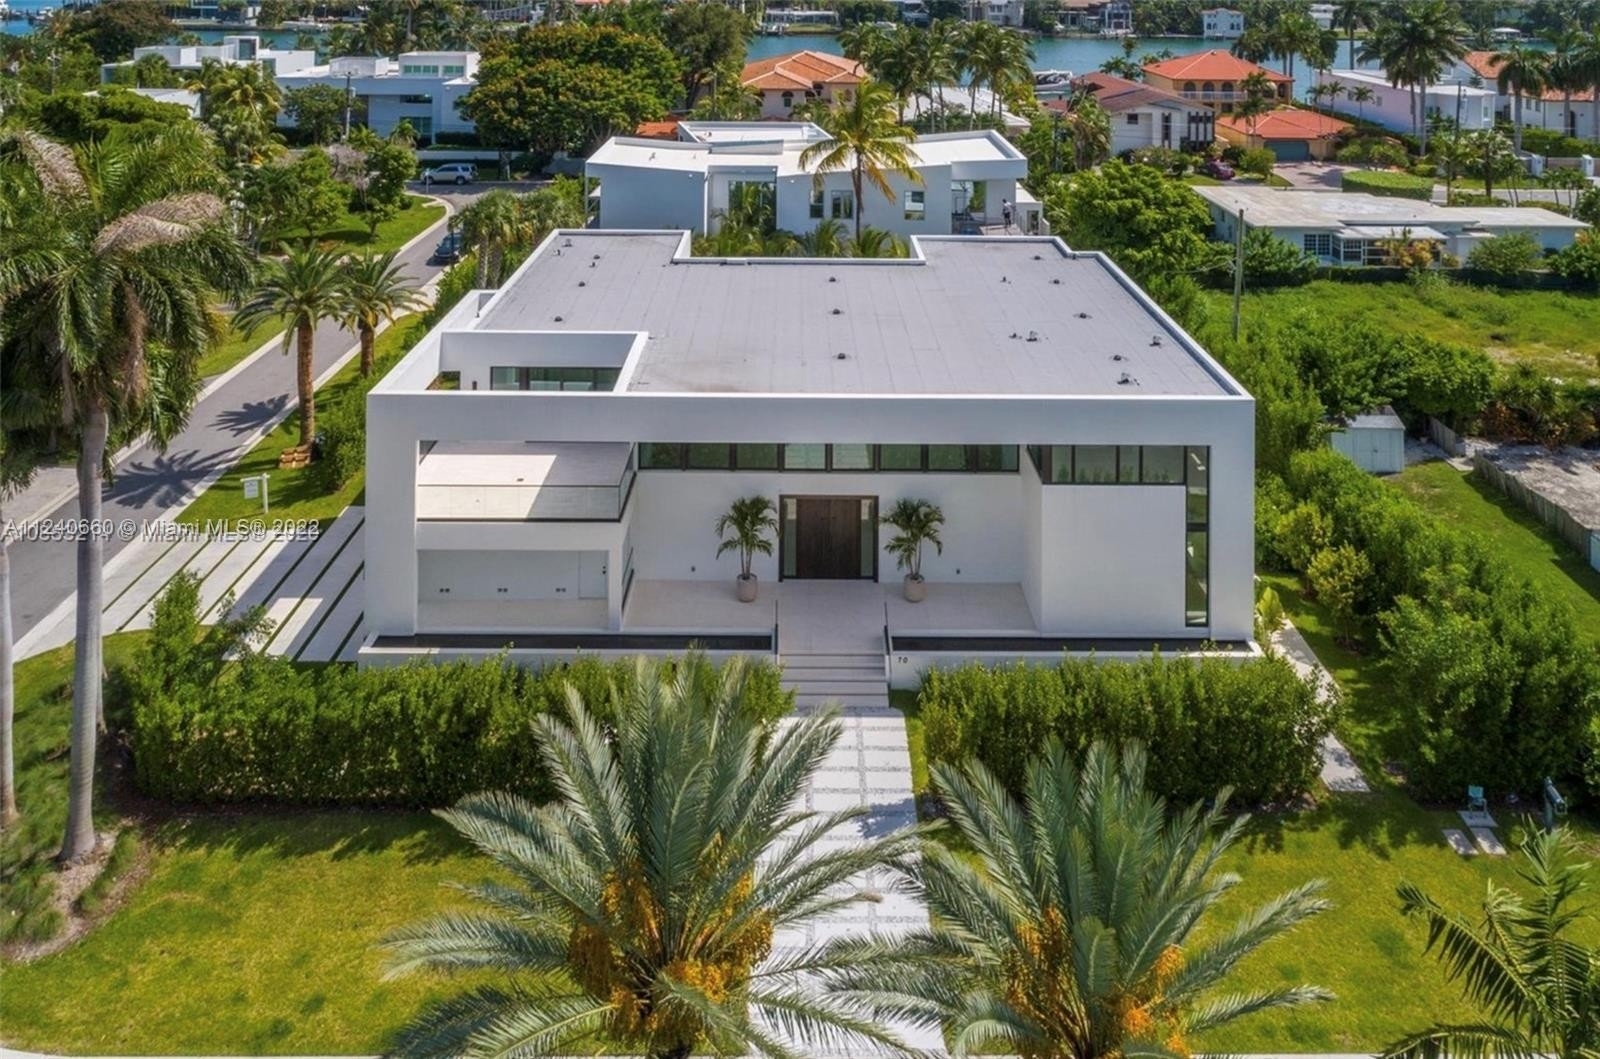 Single Family Home for Sale at Hibiscus Island, Miami Beach, FL 33139